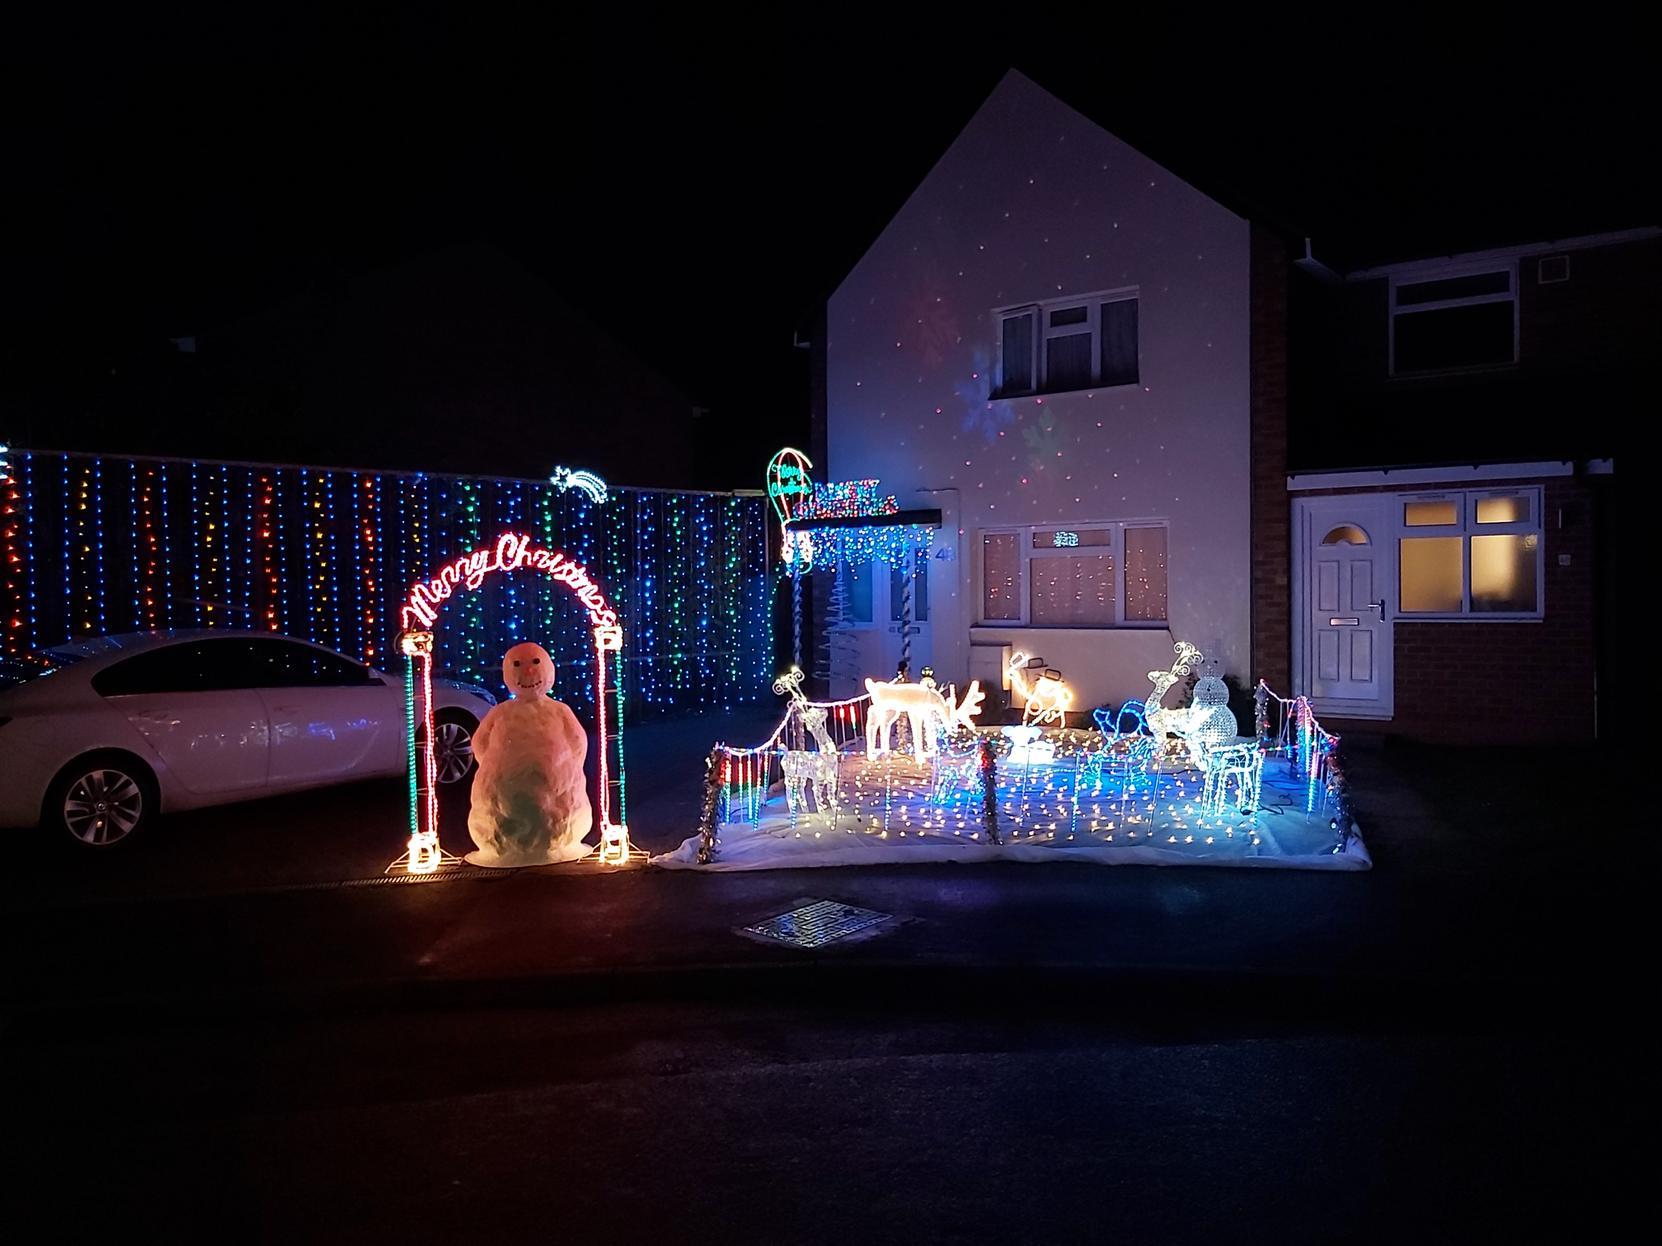 This photo is from Mark Ellis, of Frances Road, Harbury, who said: ""Lots of us decorate our houses. We have an organised turn on each year to help raise funds for Guild Dogs for the Blind."